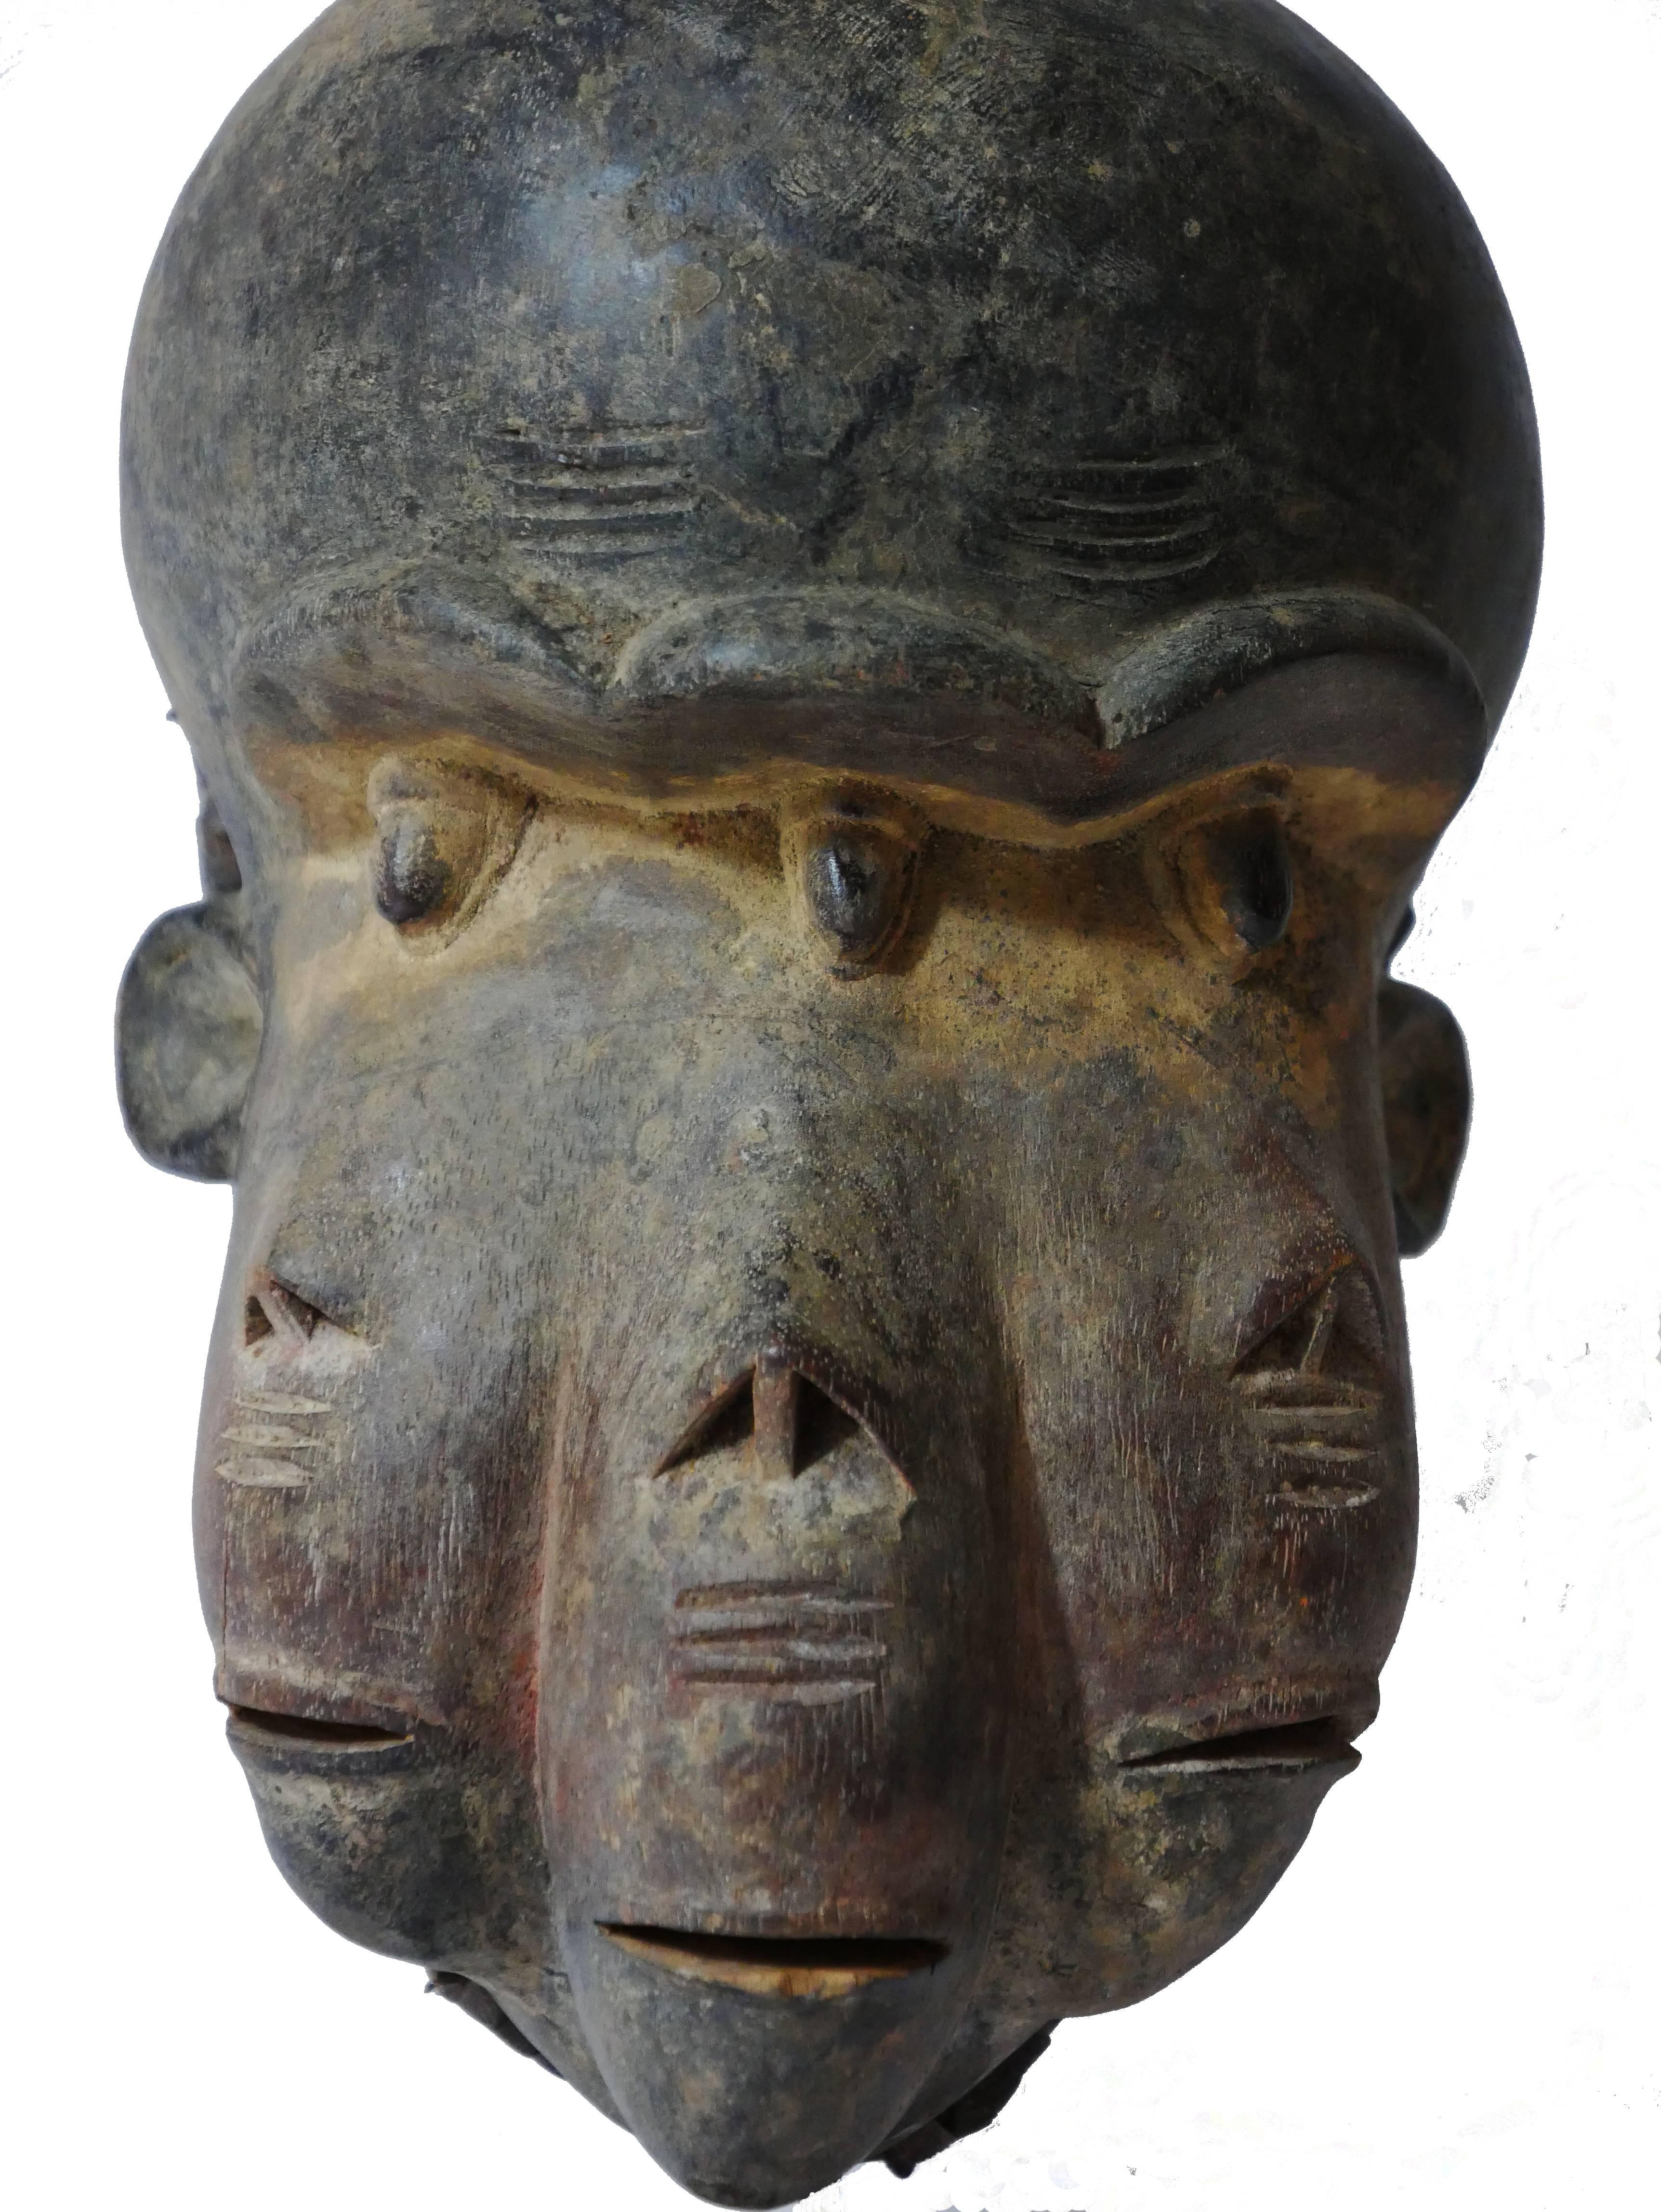 Ngontang mask from the Fang people of Gabon
Mask: Tripple-Faced Monkey King - ancestral spiriti ensuring prosperity and safety of the tribe at present and in the future.
People; Gabon
Wood, pigment,
Dimensions: H 30cm x 20cm or 11.8 x 7.9